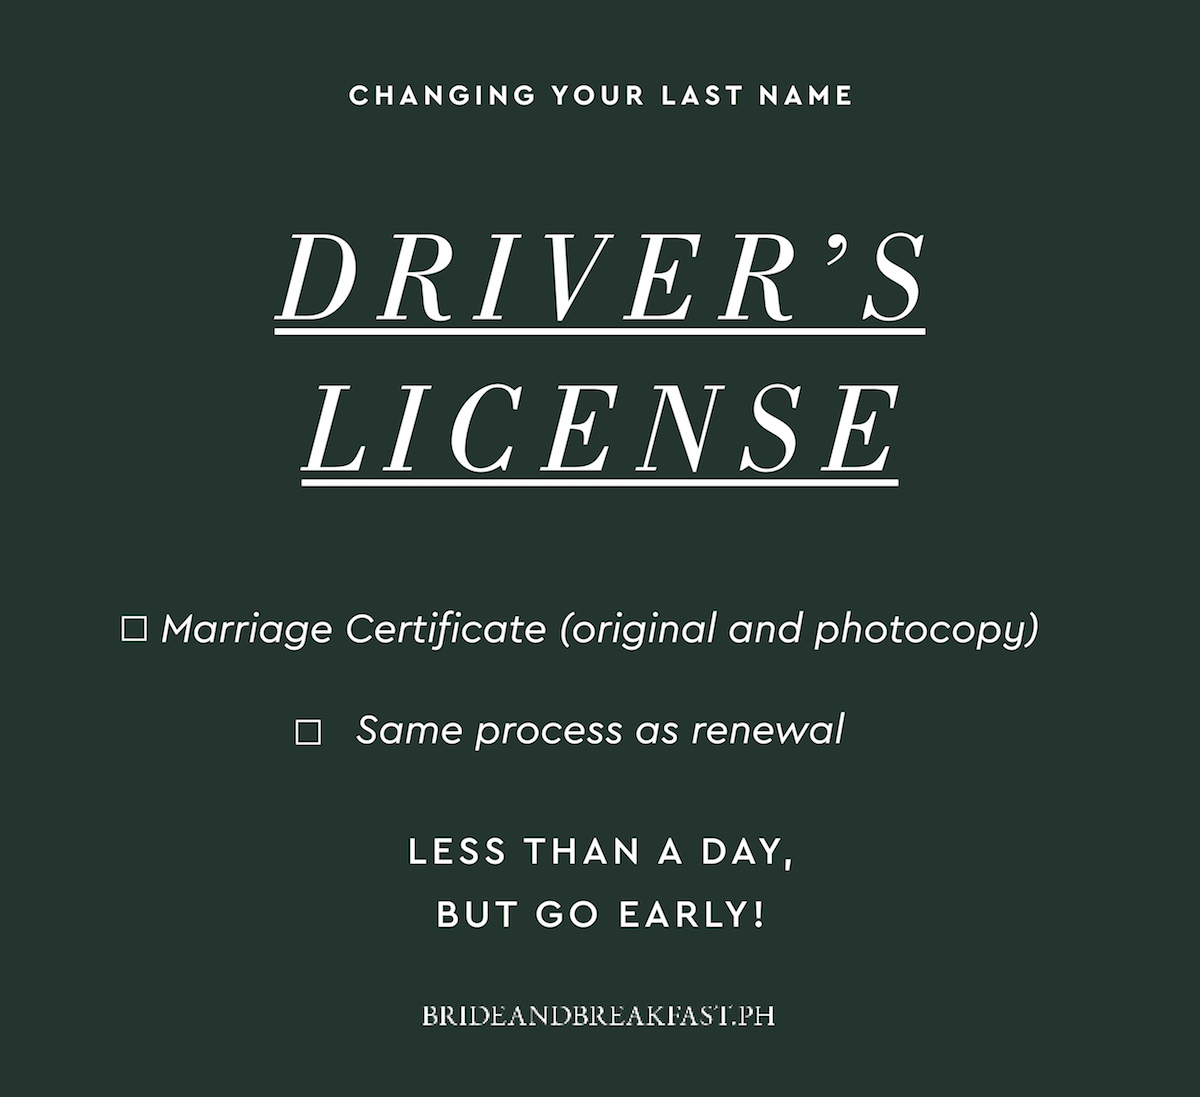 2. Driver's License Marriage Certificate (original and photocopy) Same process as renewal Less than a day, but go early